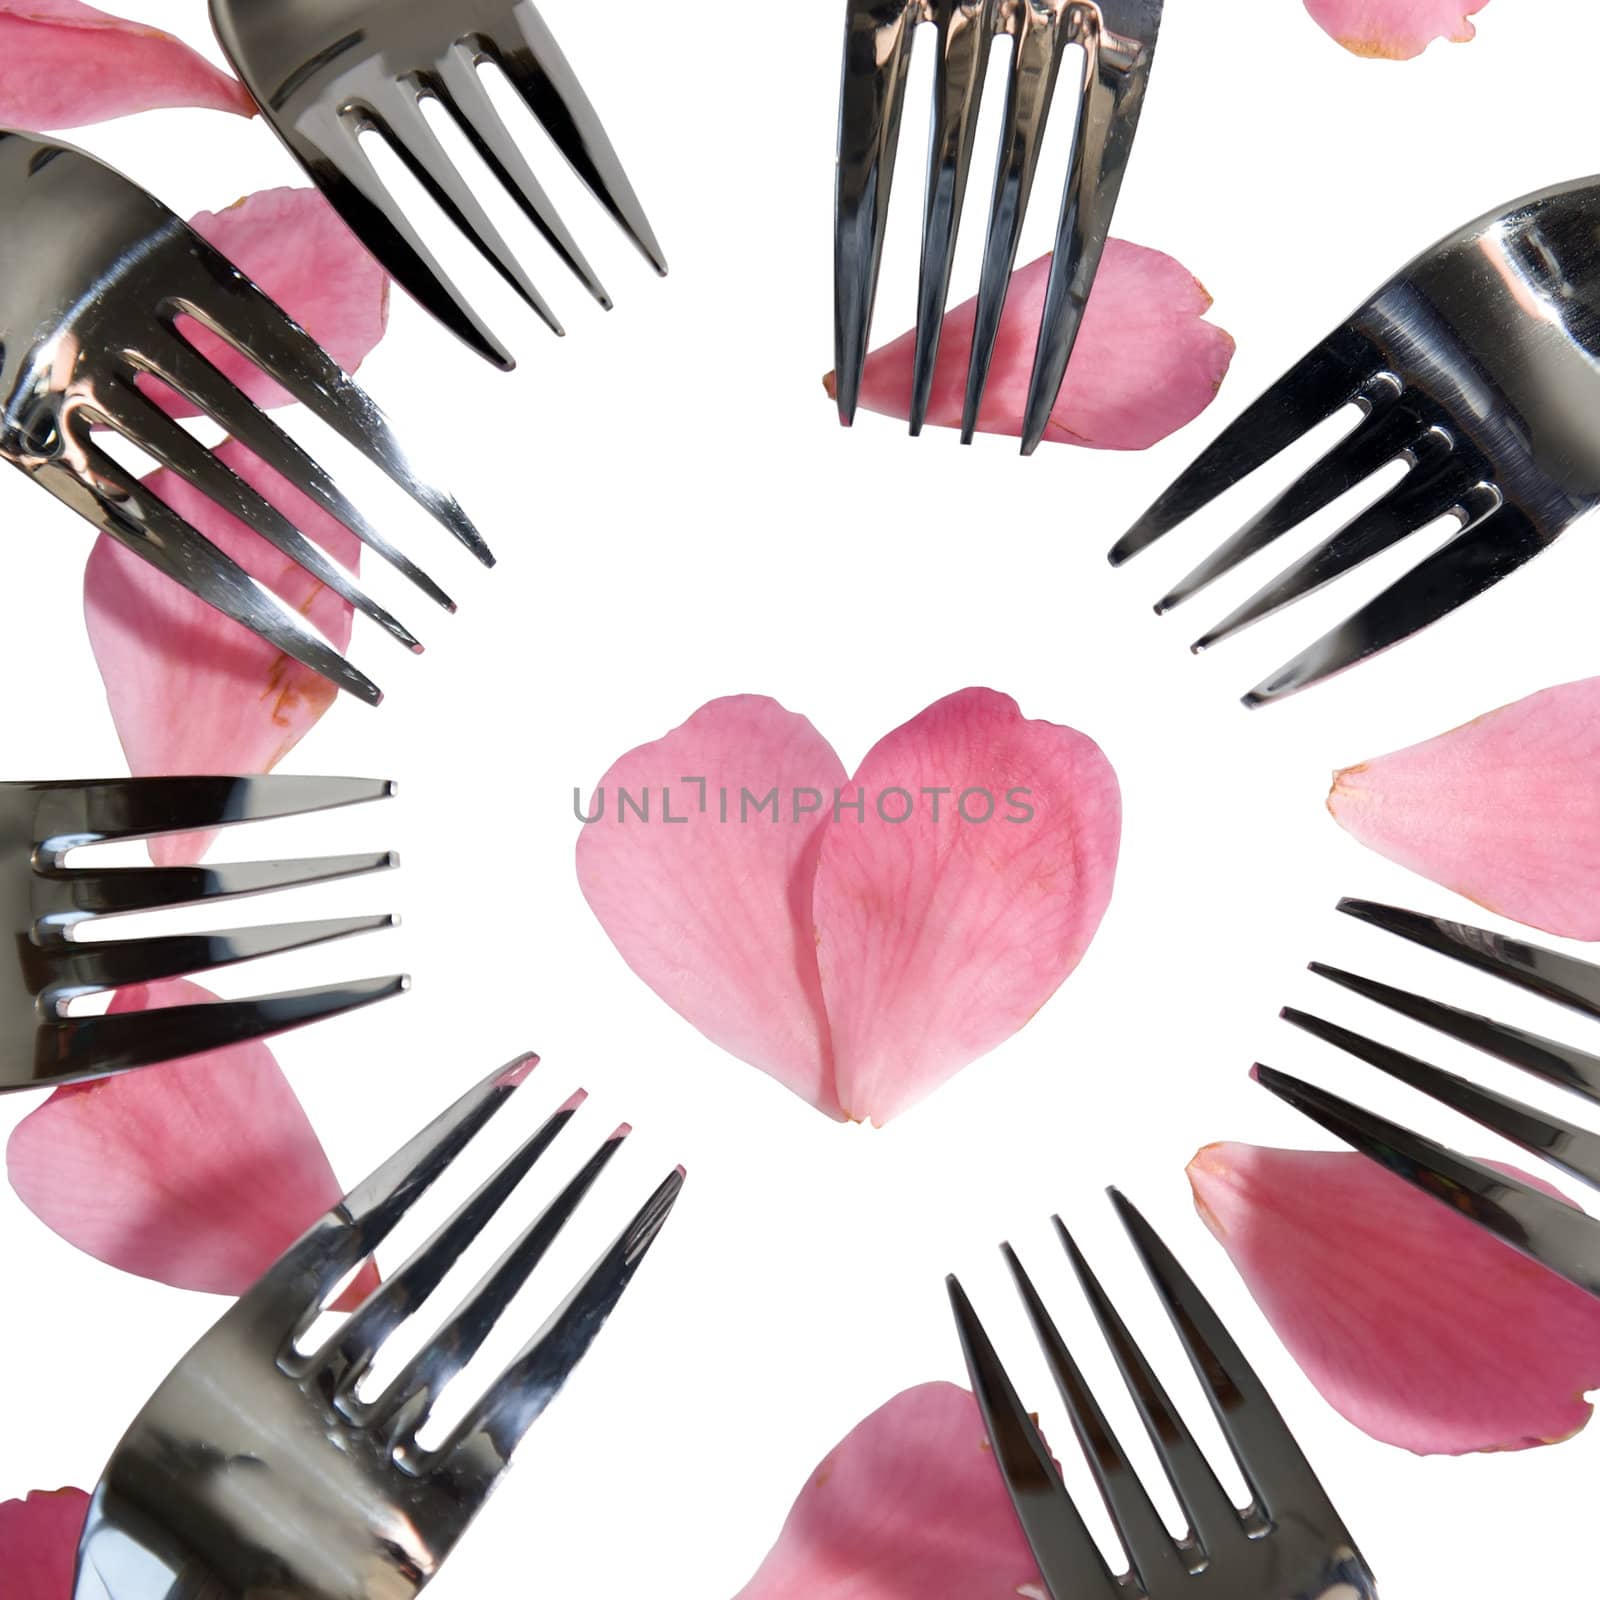 forks surrounding heart shape and rose petals by morrbyte